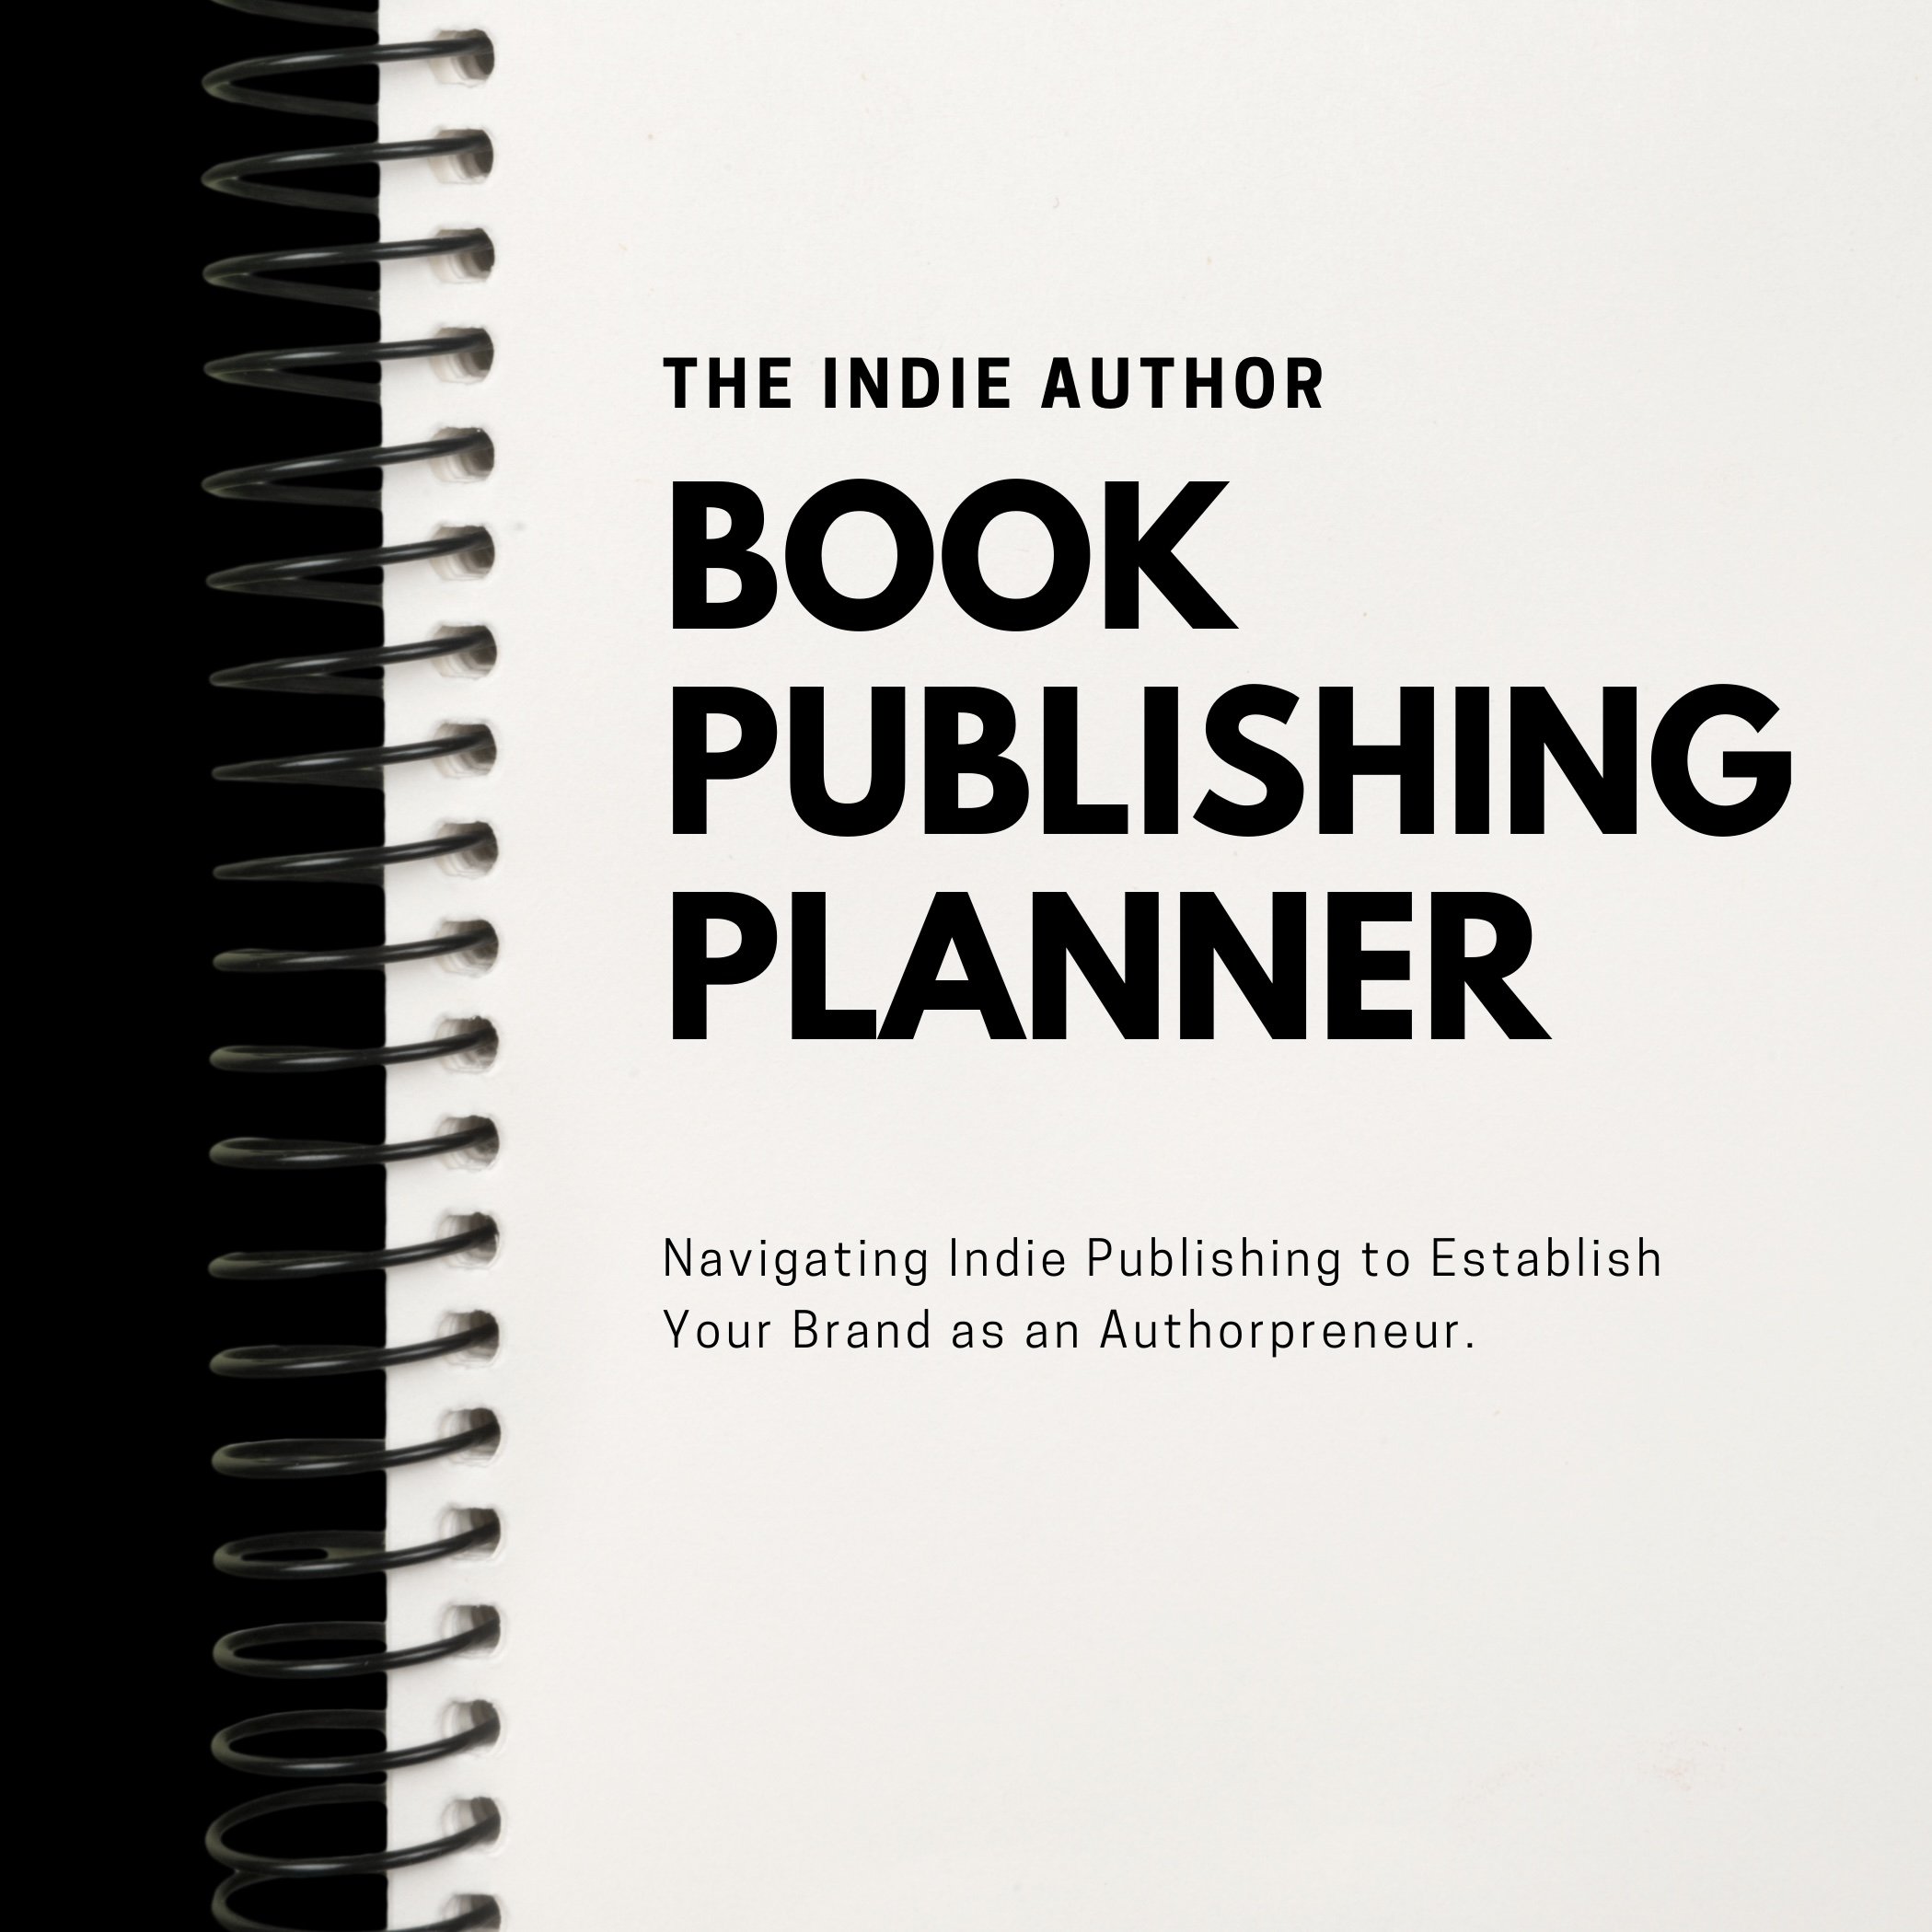 The Indie Author Book Publishing Planner